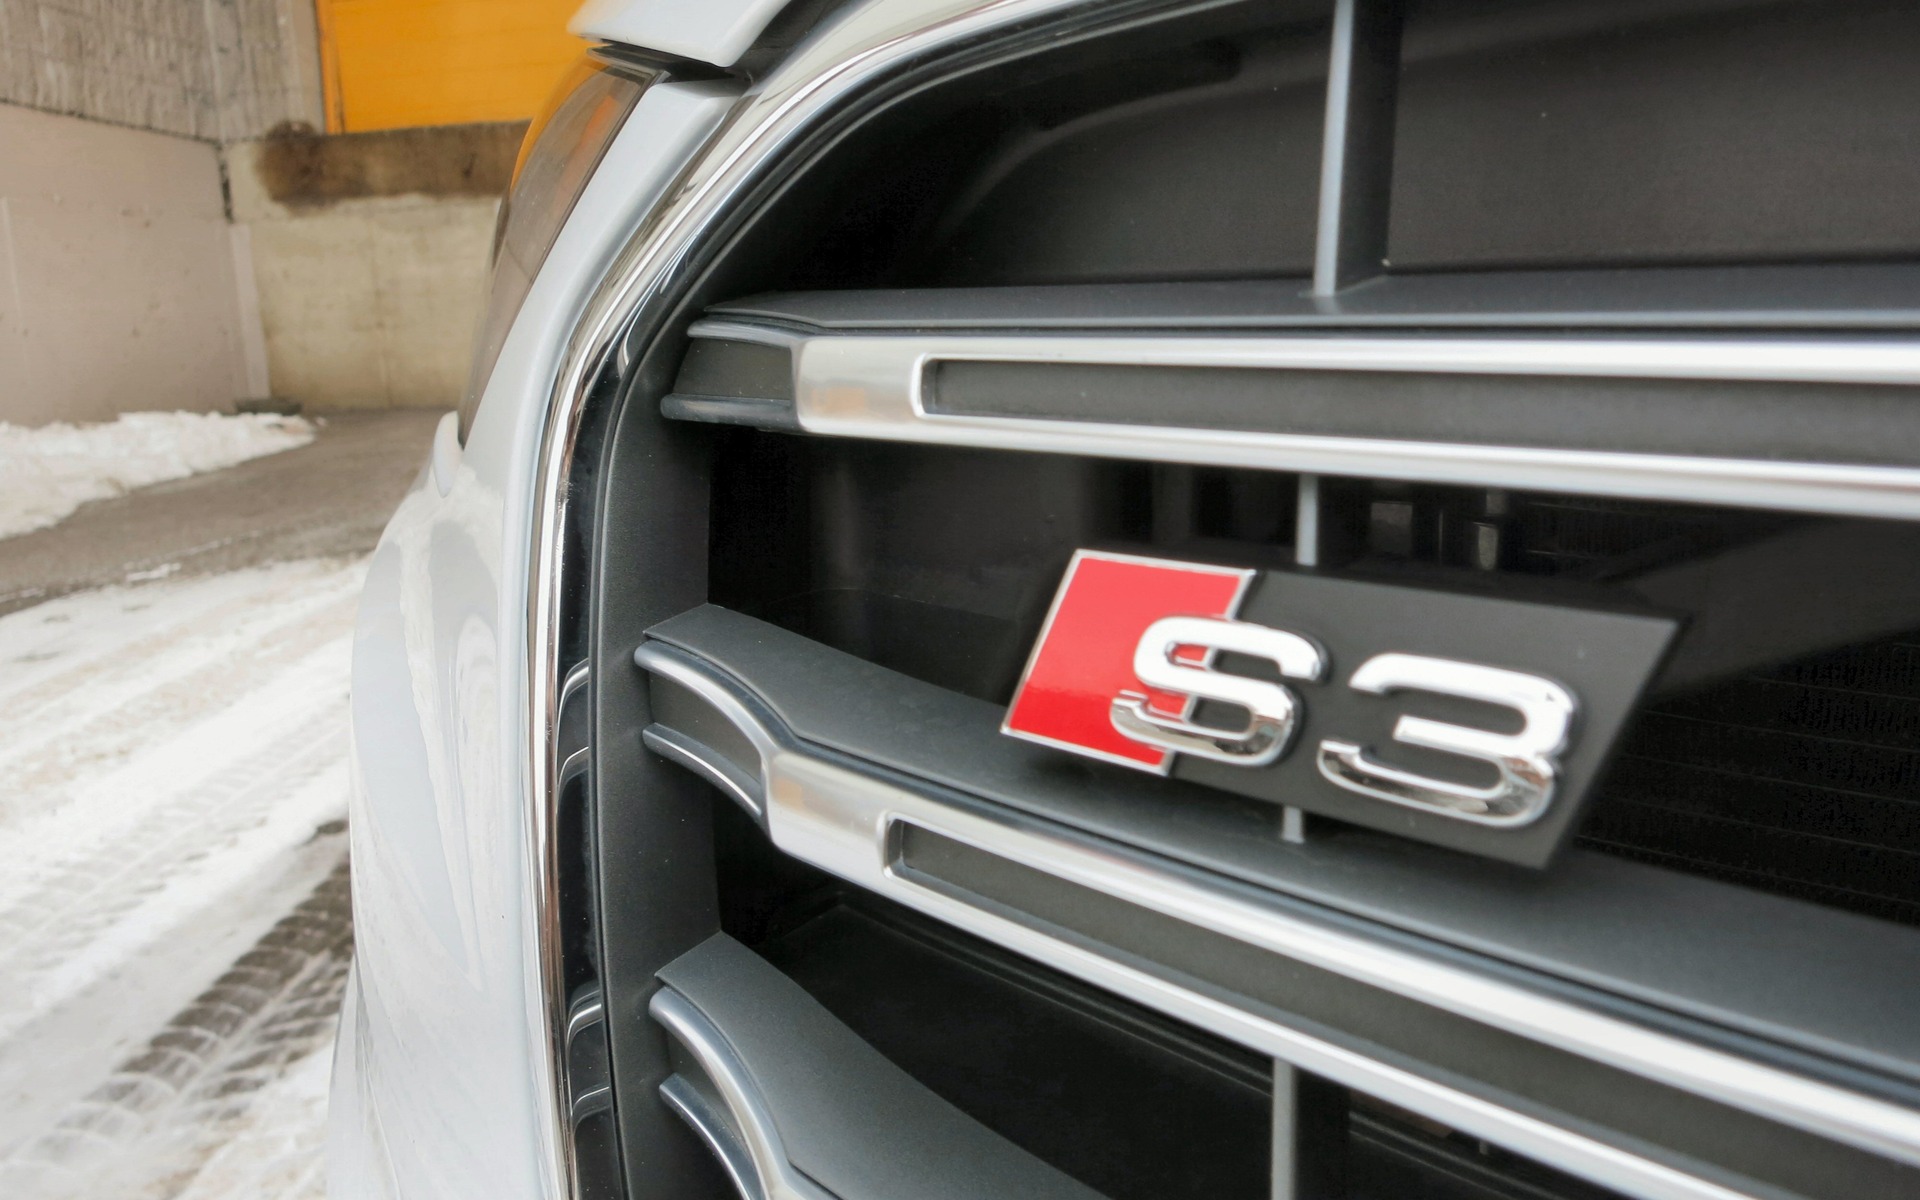 My enthusiasm for the 2015 Audi S3 knows no bounds.